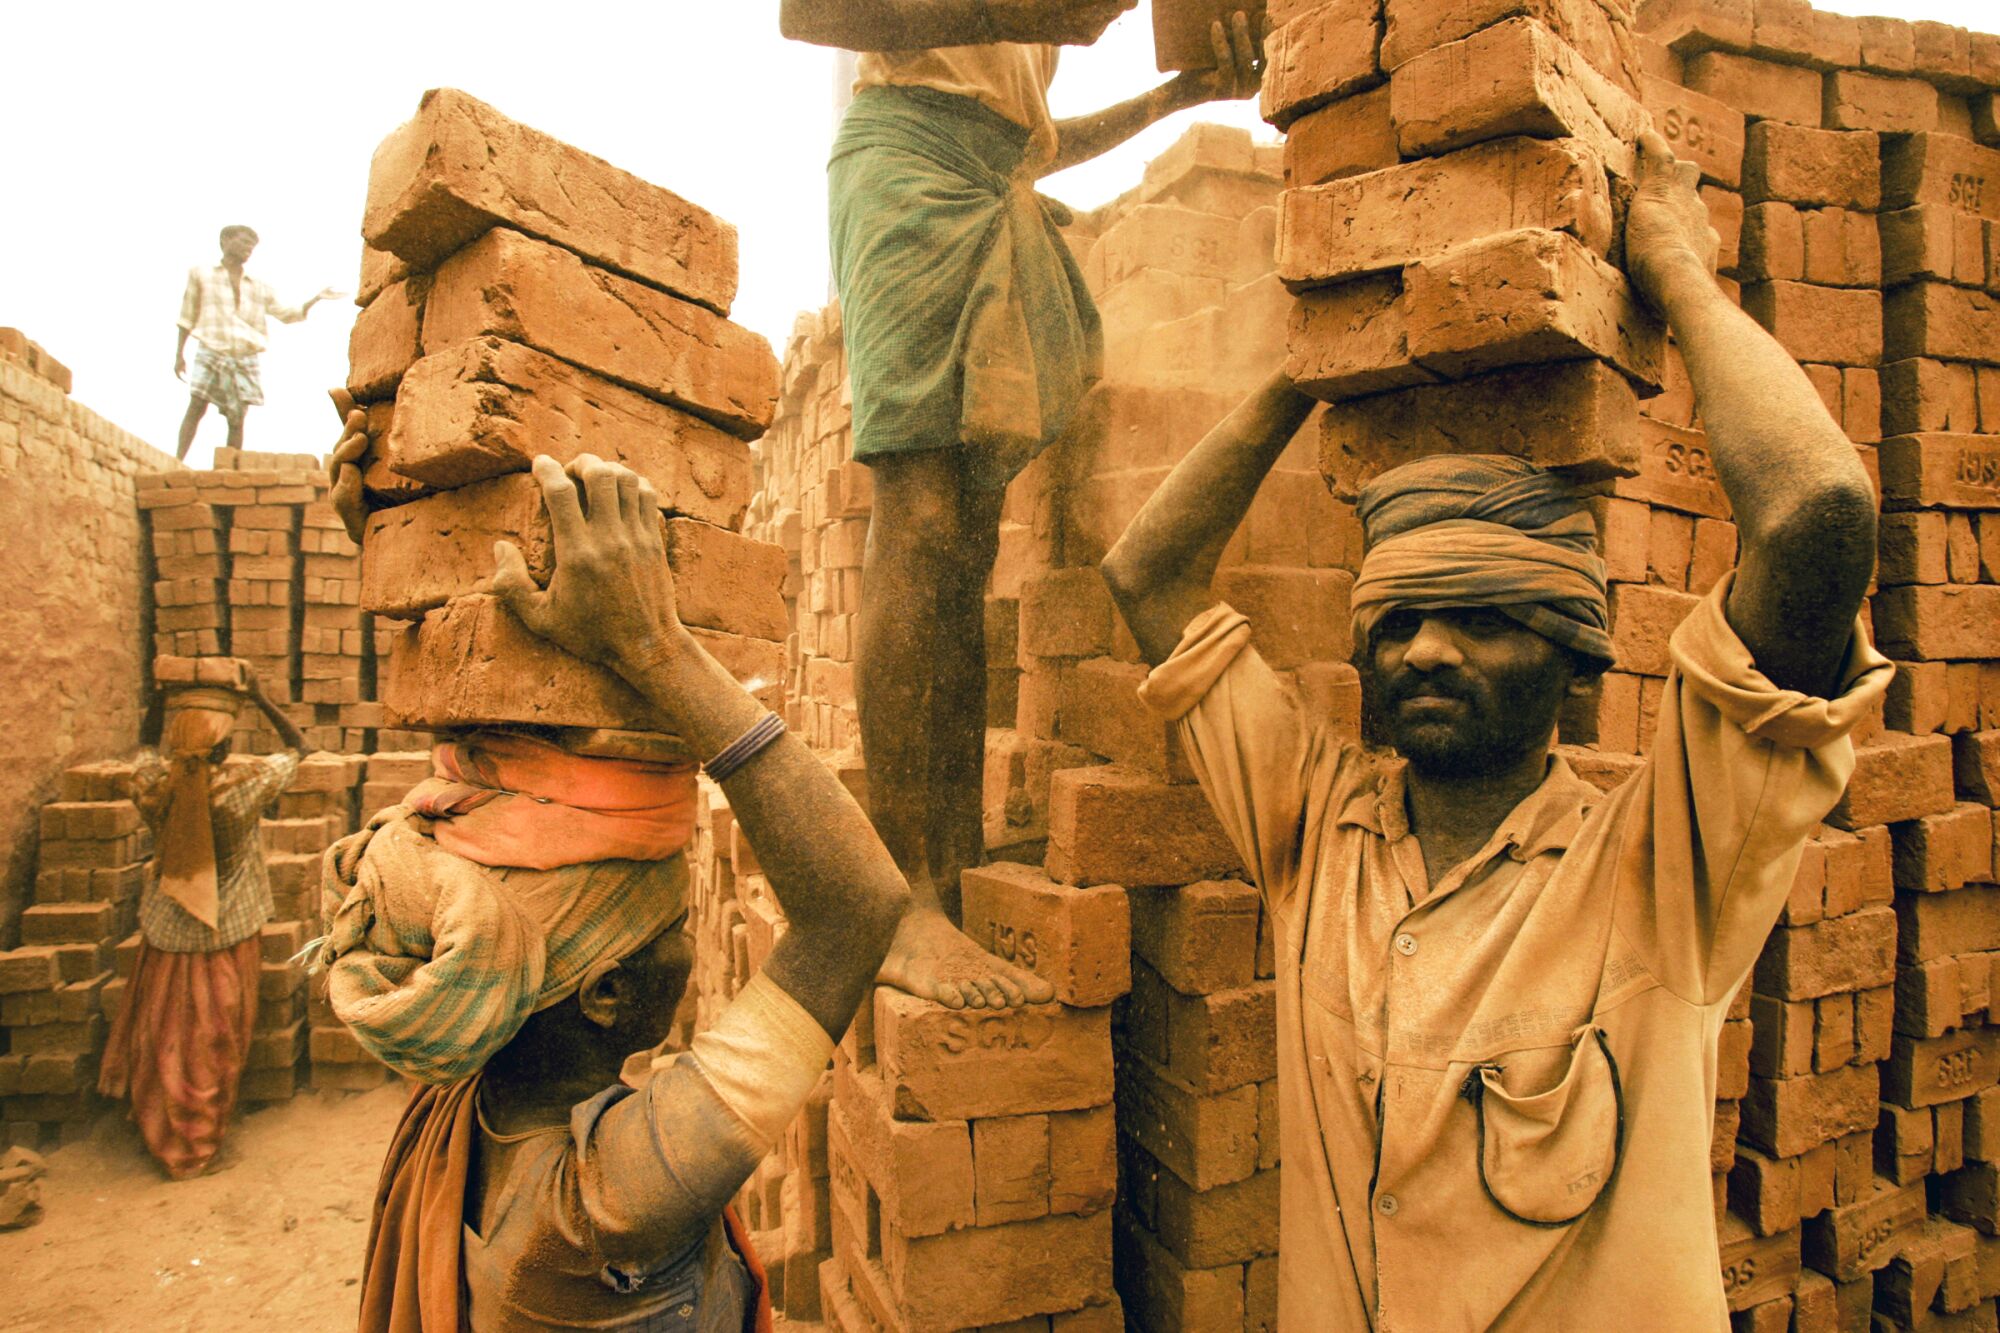 Migrant workers pile 20 bricks at a time on top of their heads, as dust falls in their faces